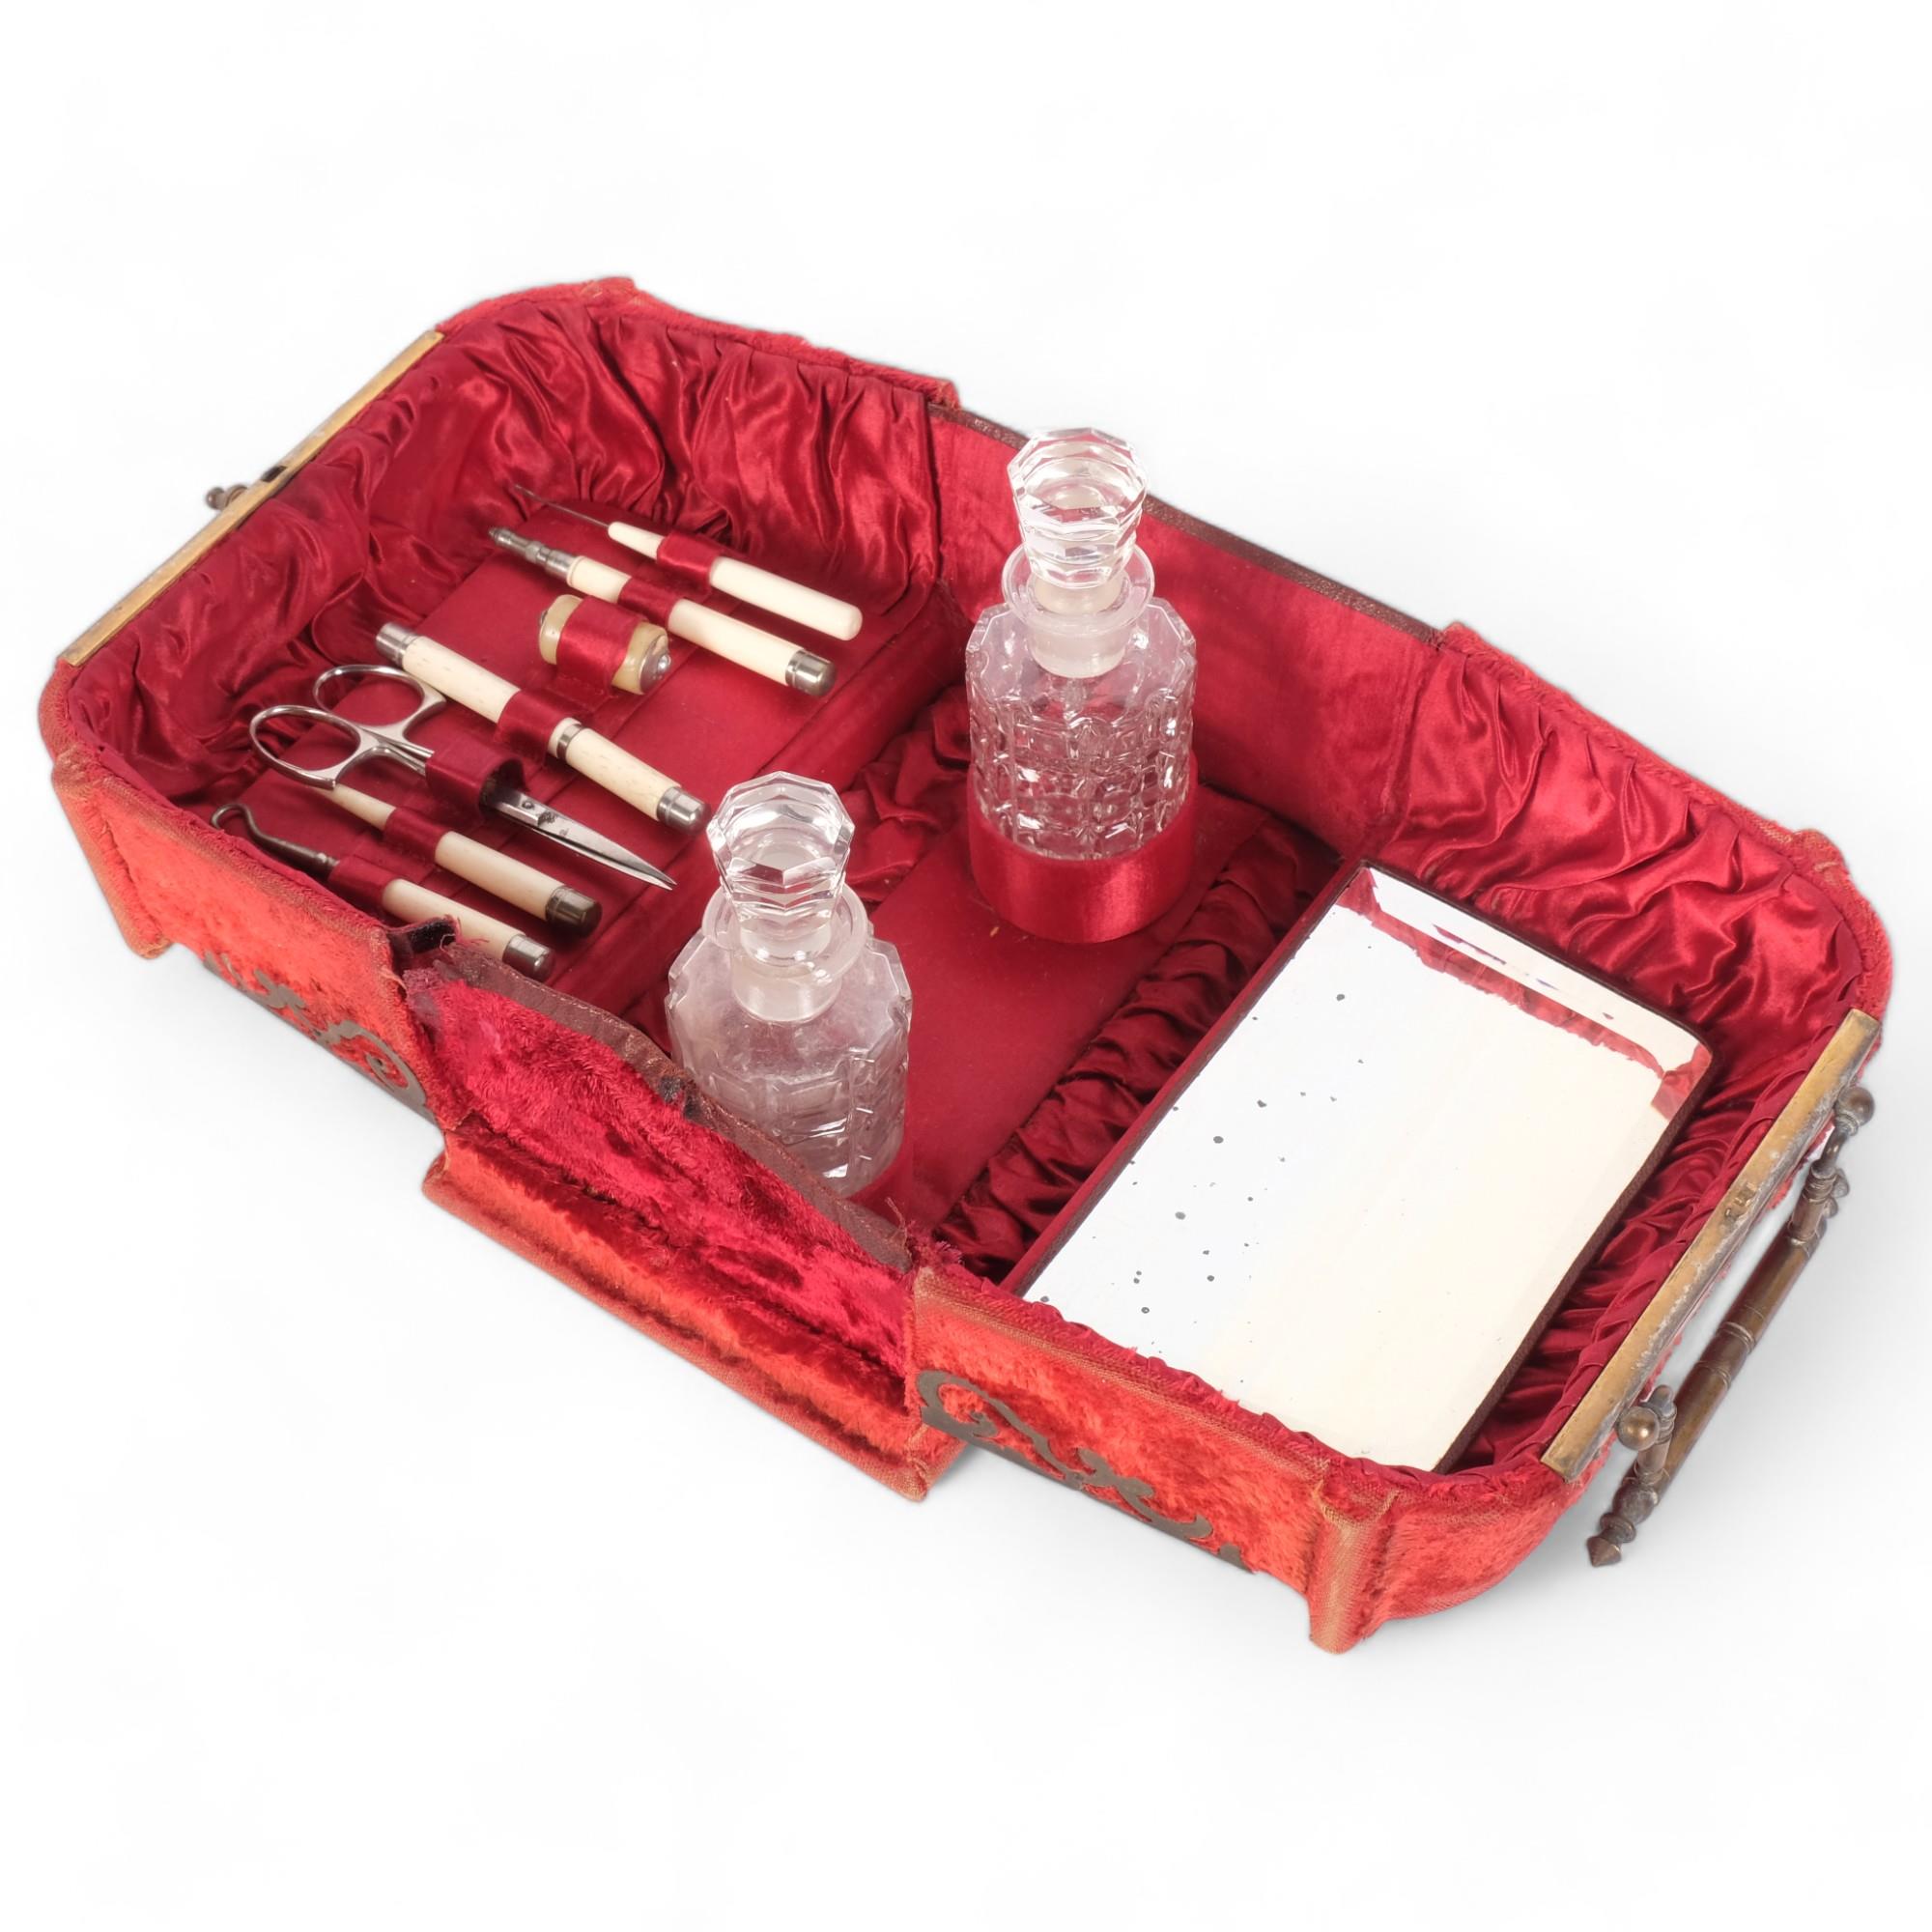 An Antique velvet-covered travelling vanity/sewing box, the interior fitted with 2 glass scent